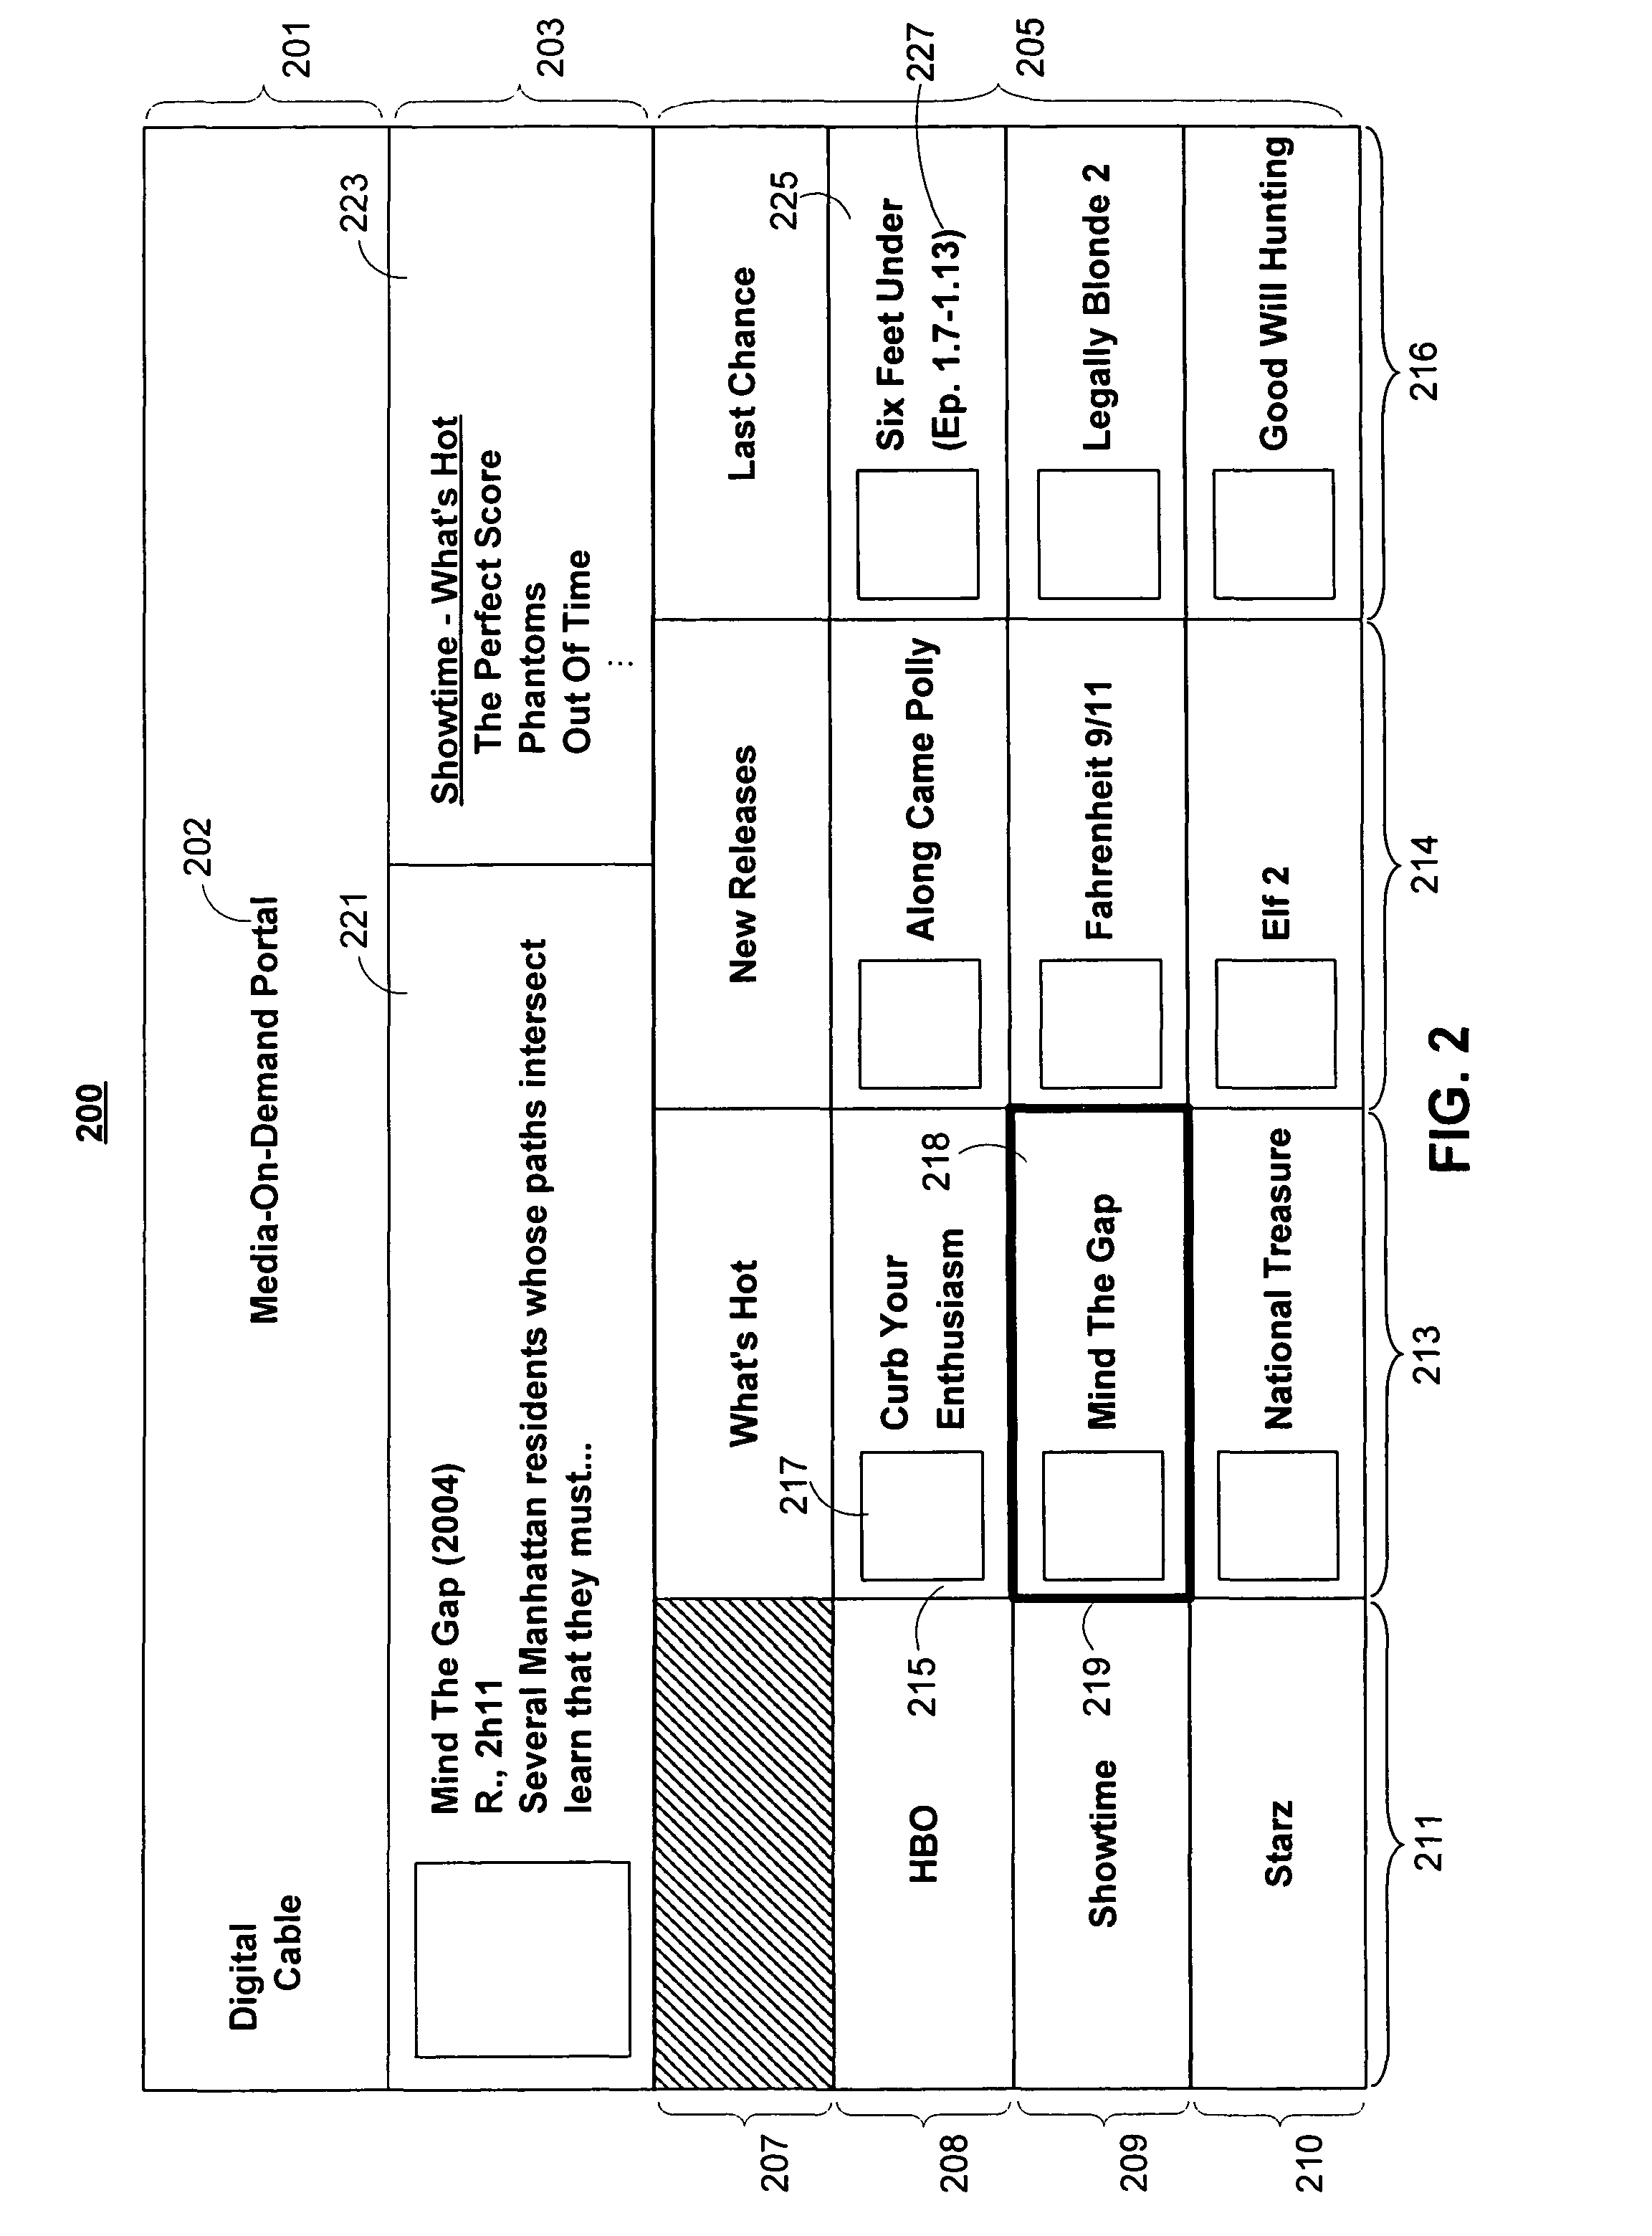 Systems and methods for providing an on-demand media portal and grid guide